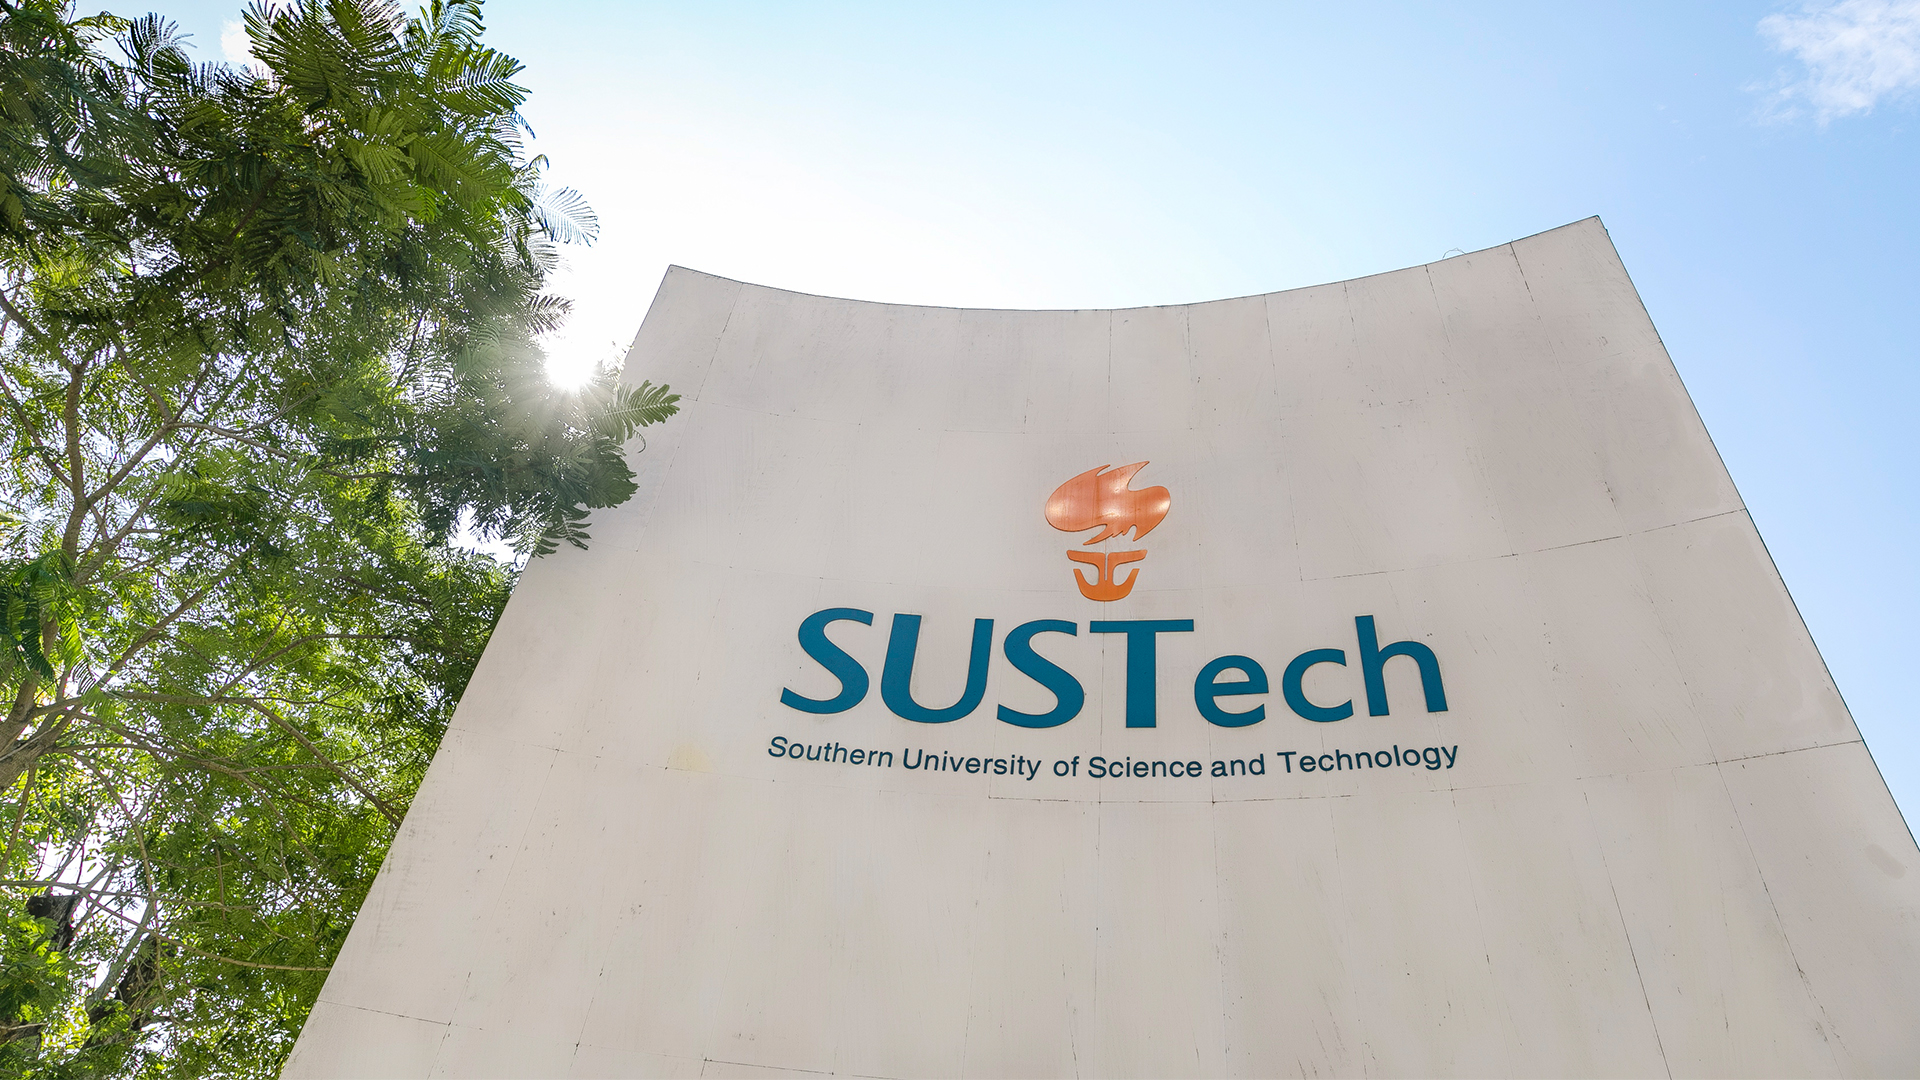 SUSTech hosts 6th Internet plus innovation and entrepreneurship competition